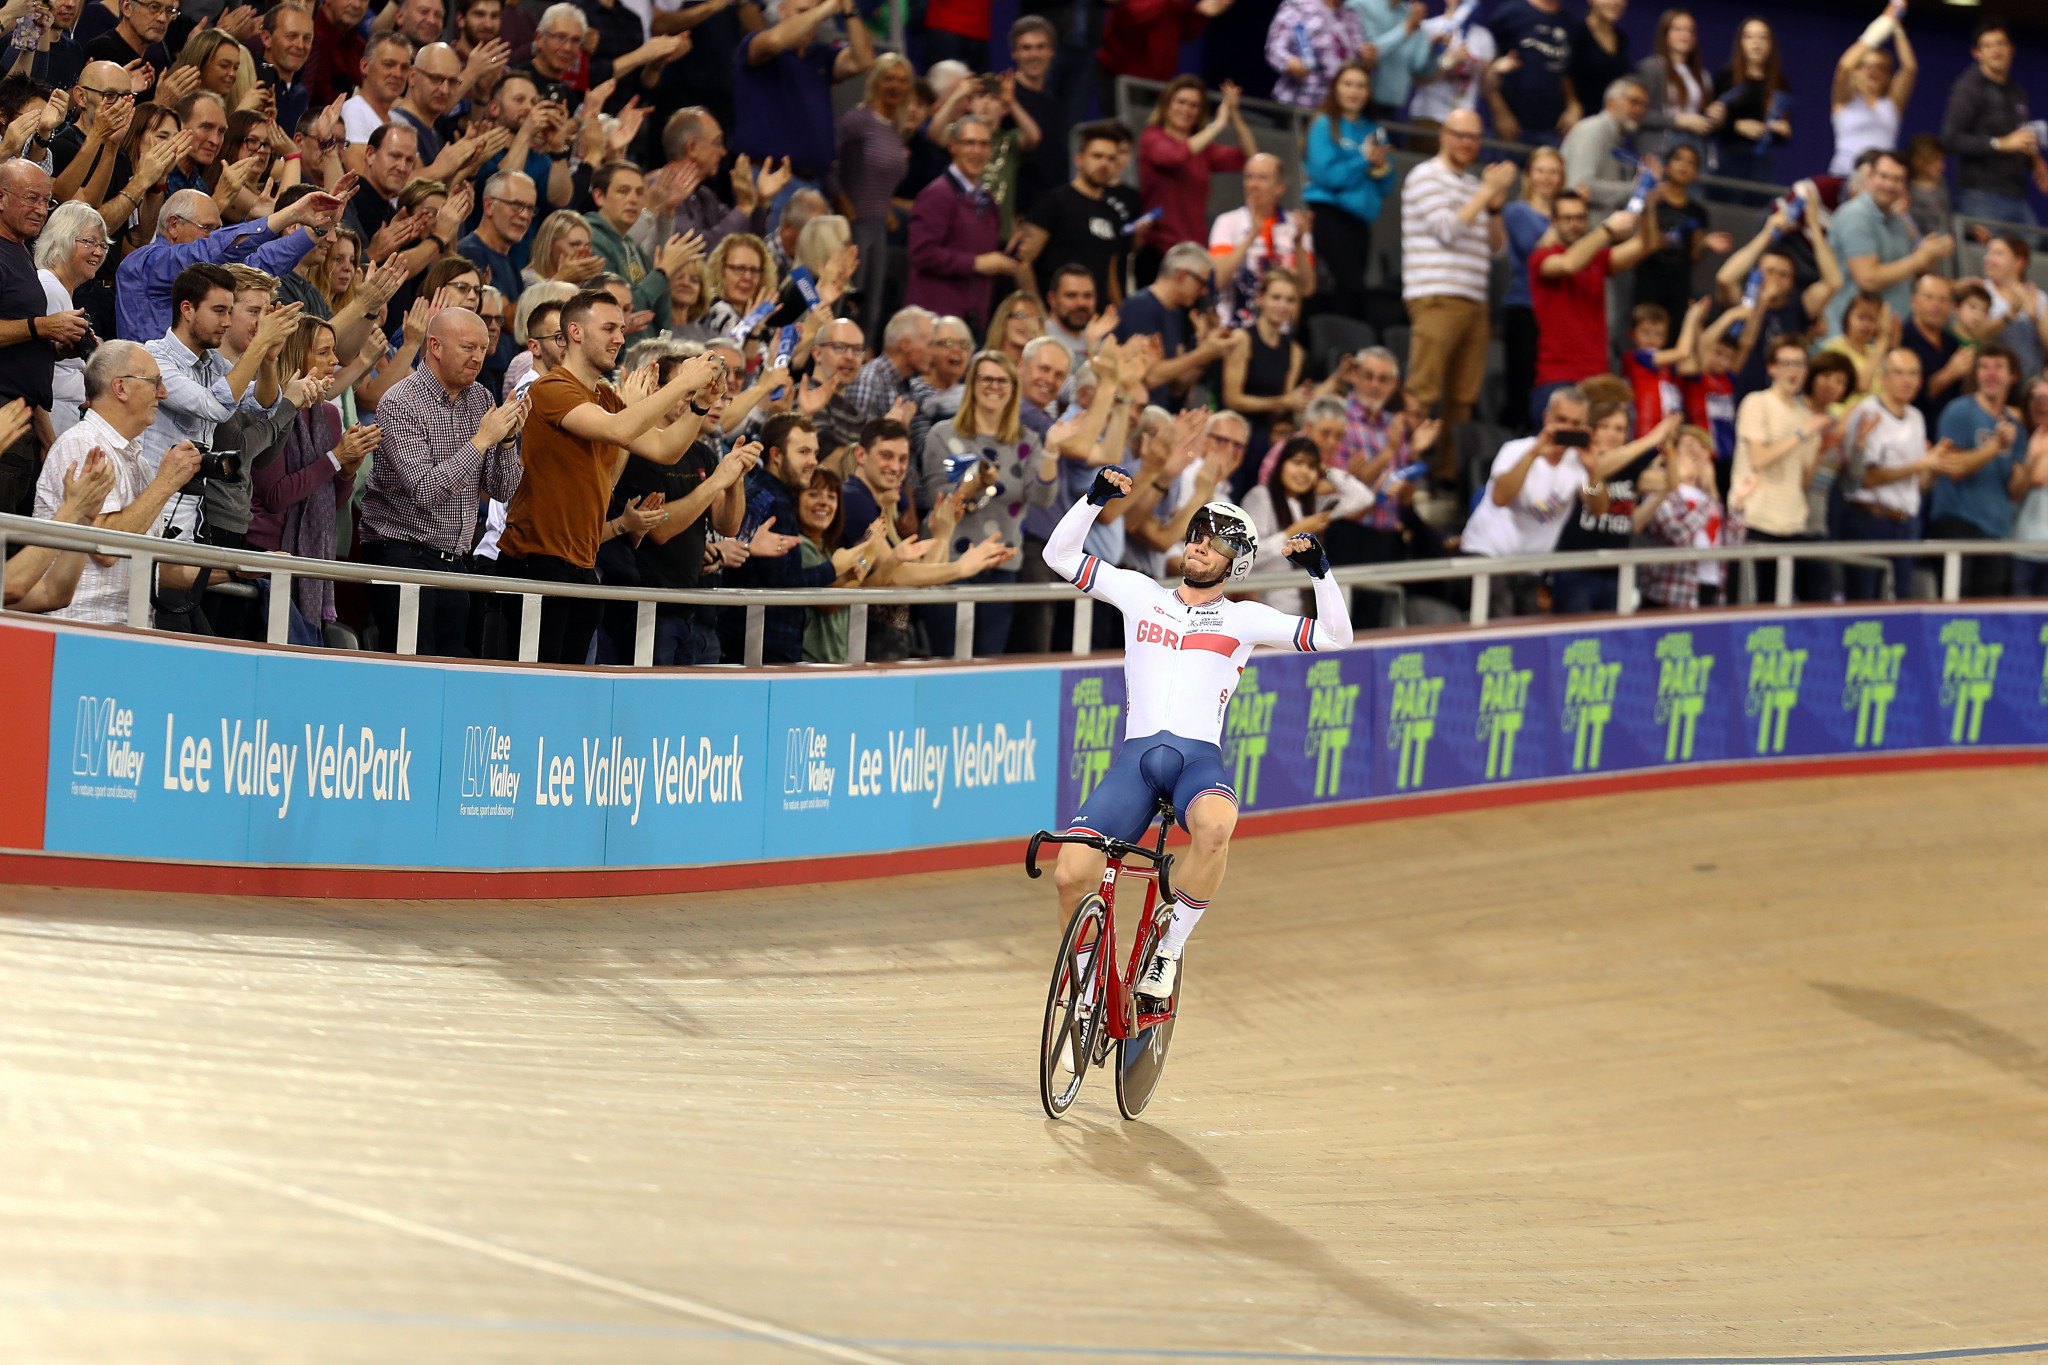 Hosts earn double gold on final day of UCI Track World Cup in London